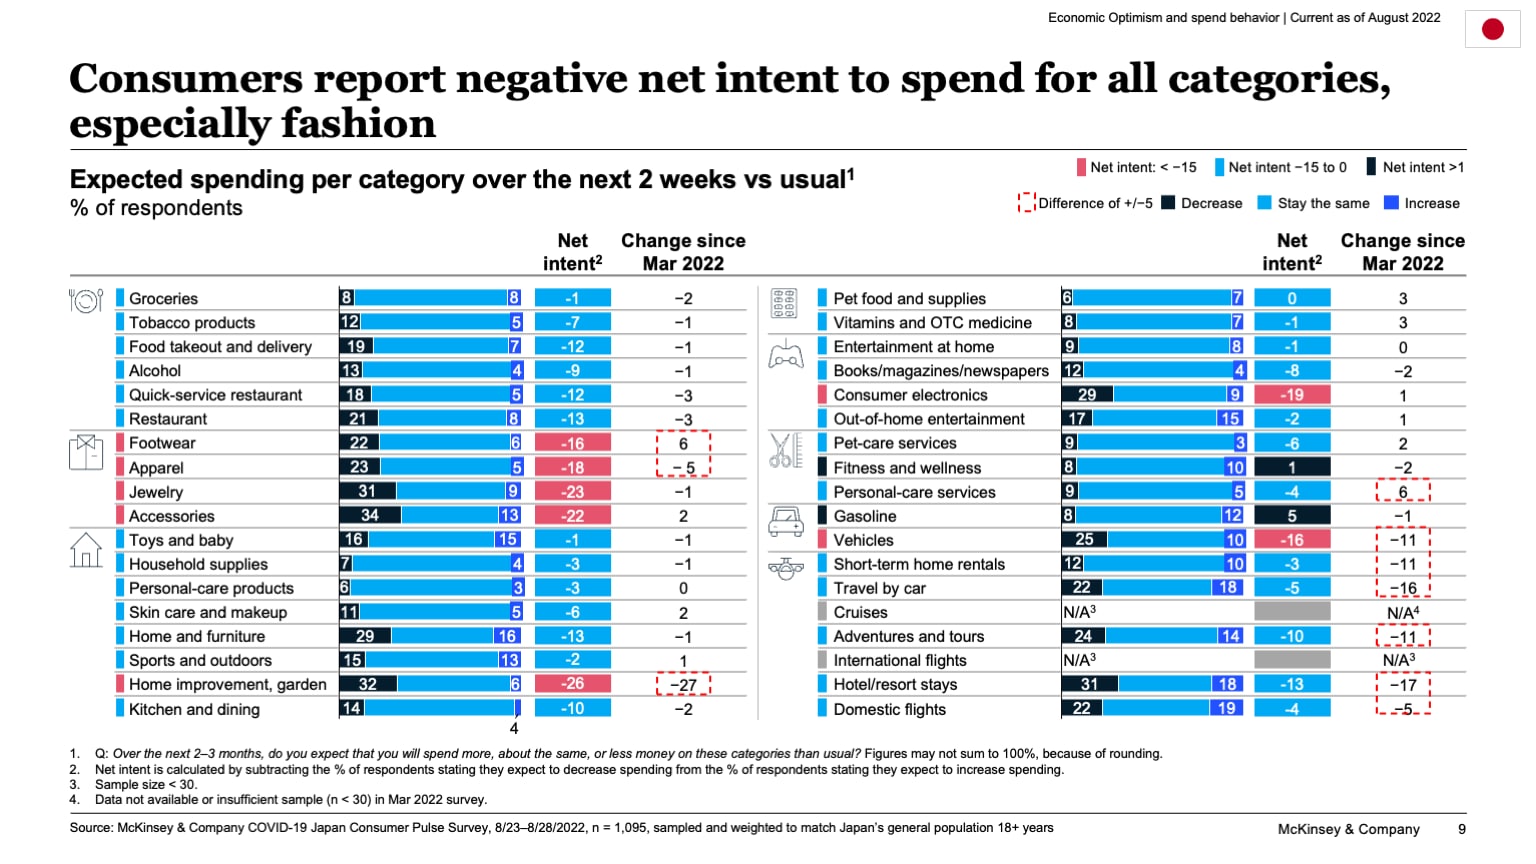 Consumers report negative net intent to spend for all categories, especially fashion